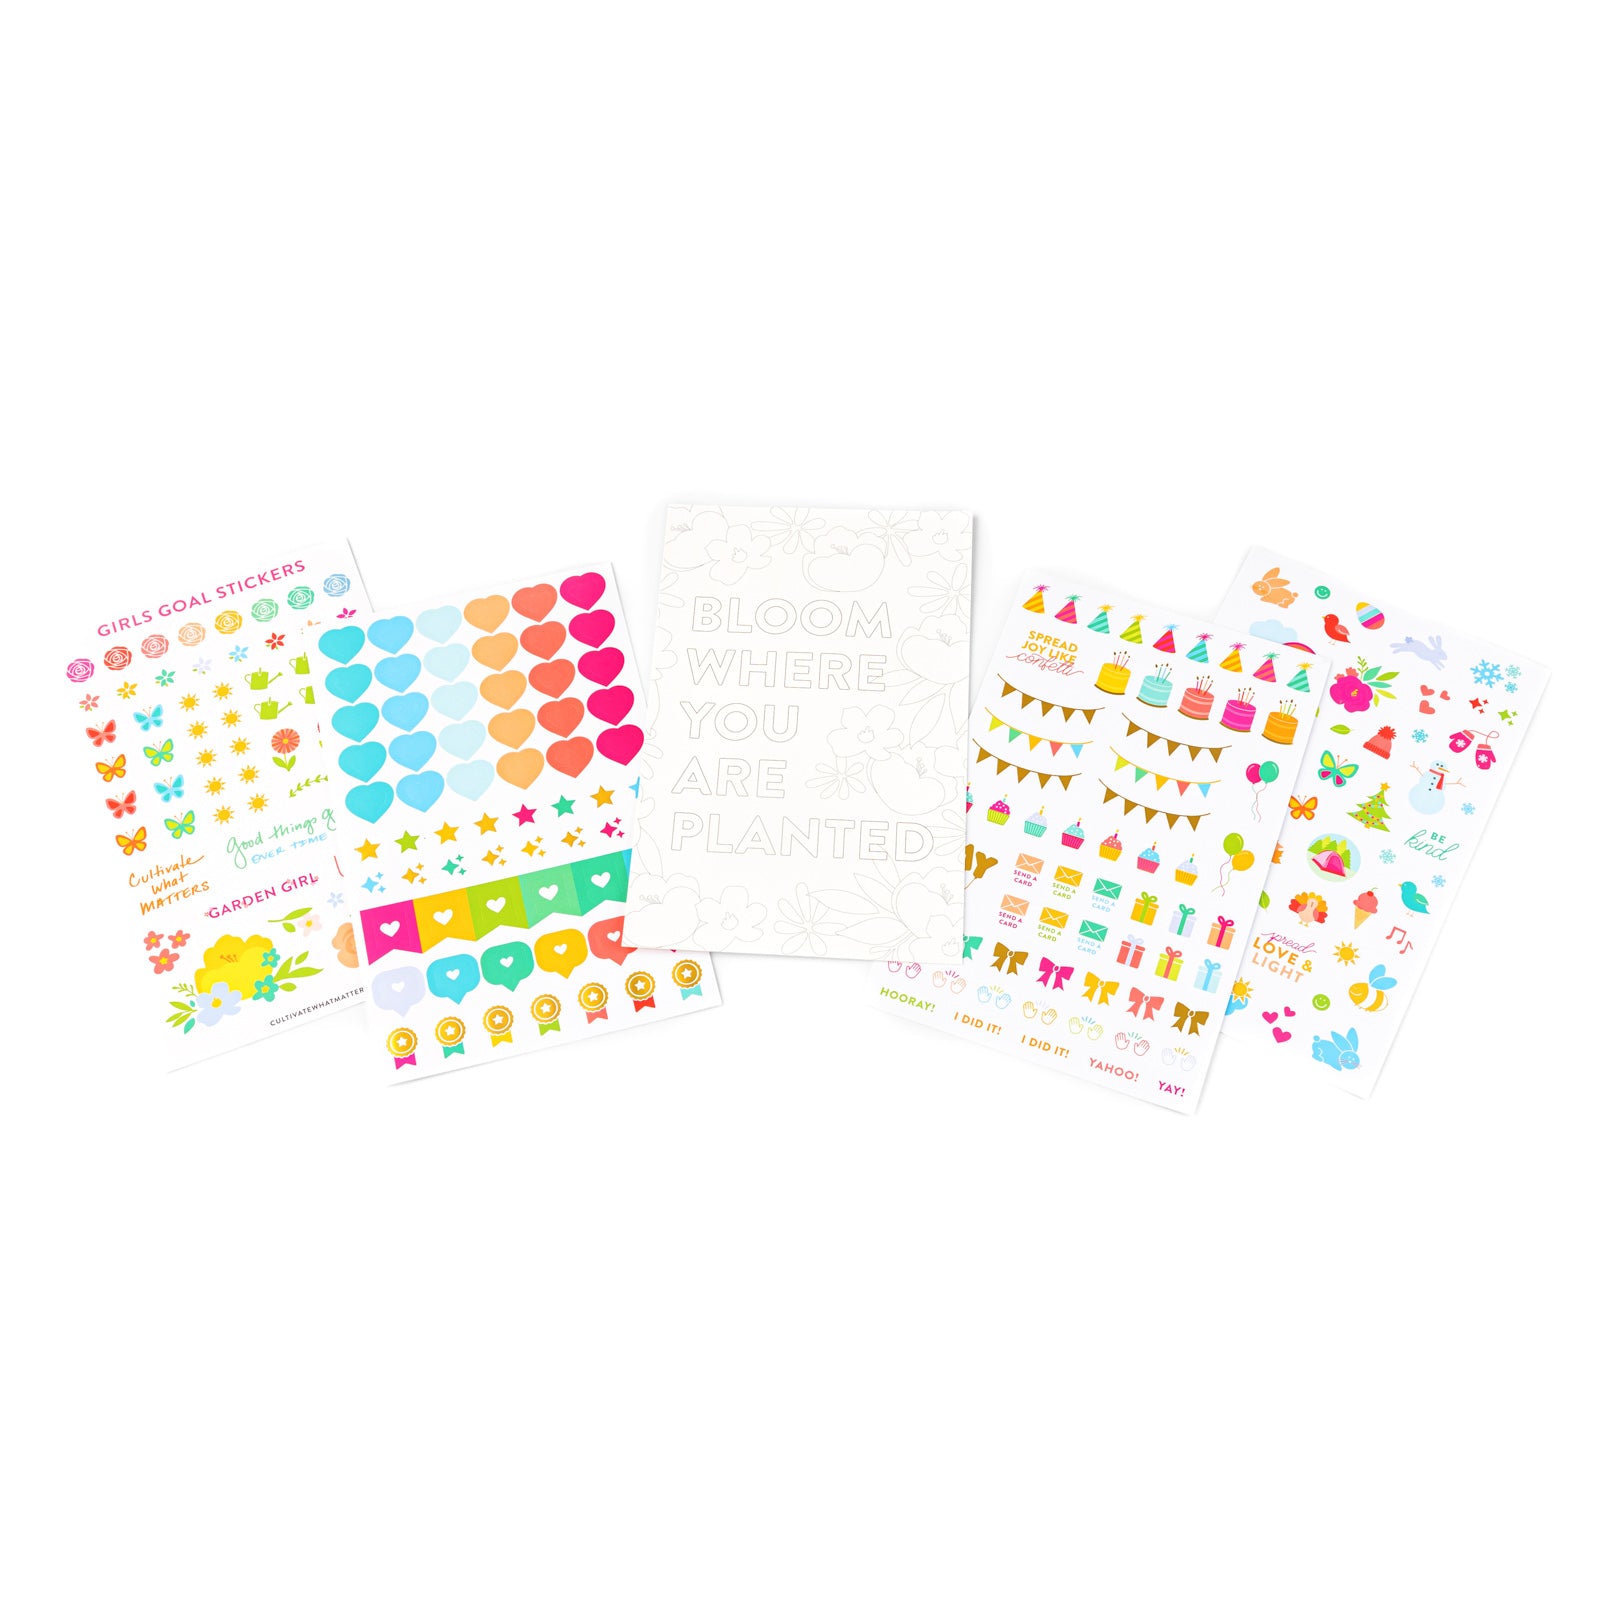 Letters & Numbers Sticker Pack | Cultivate